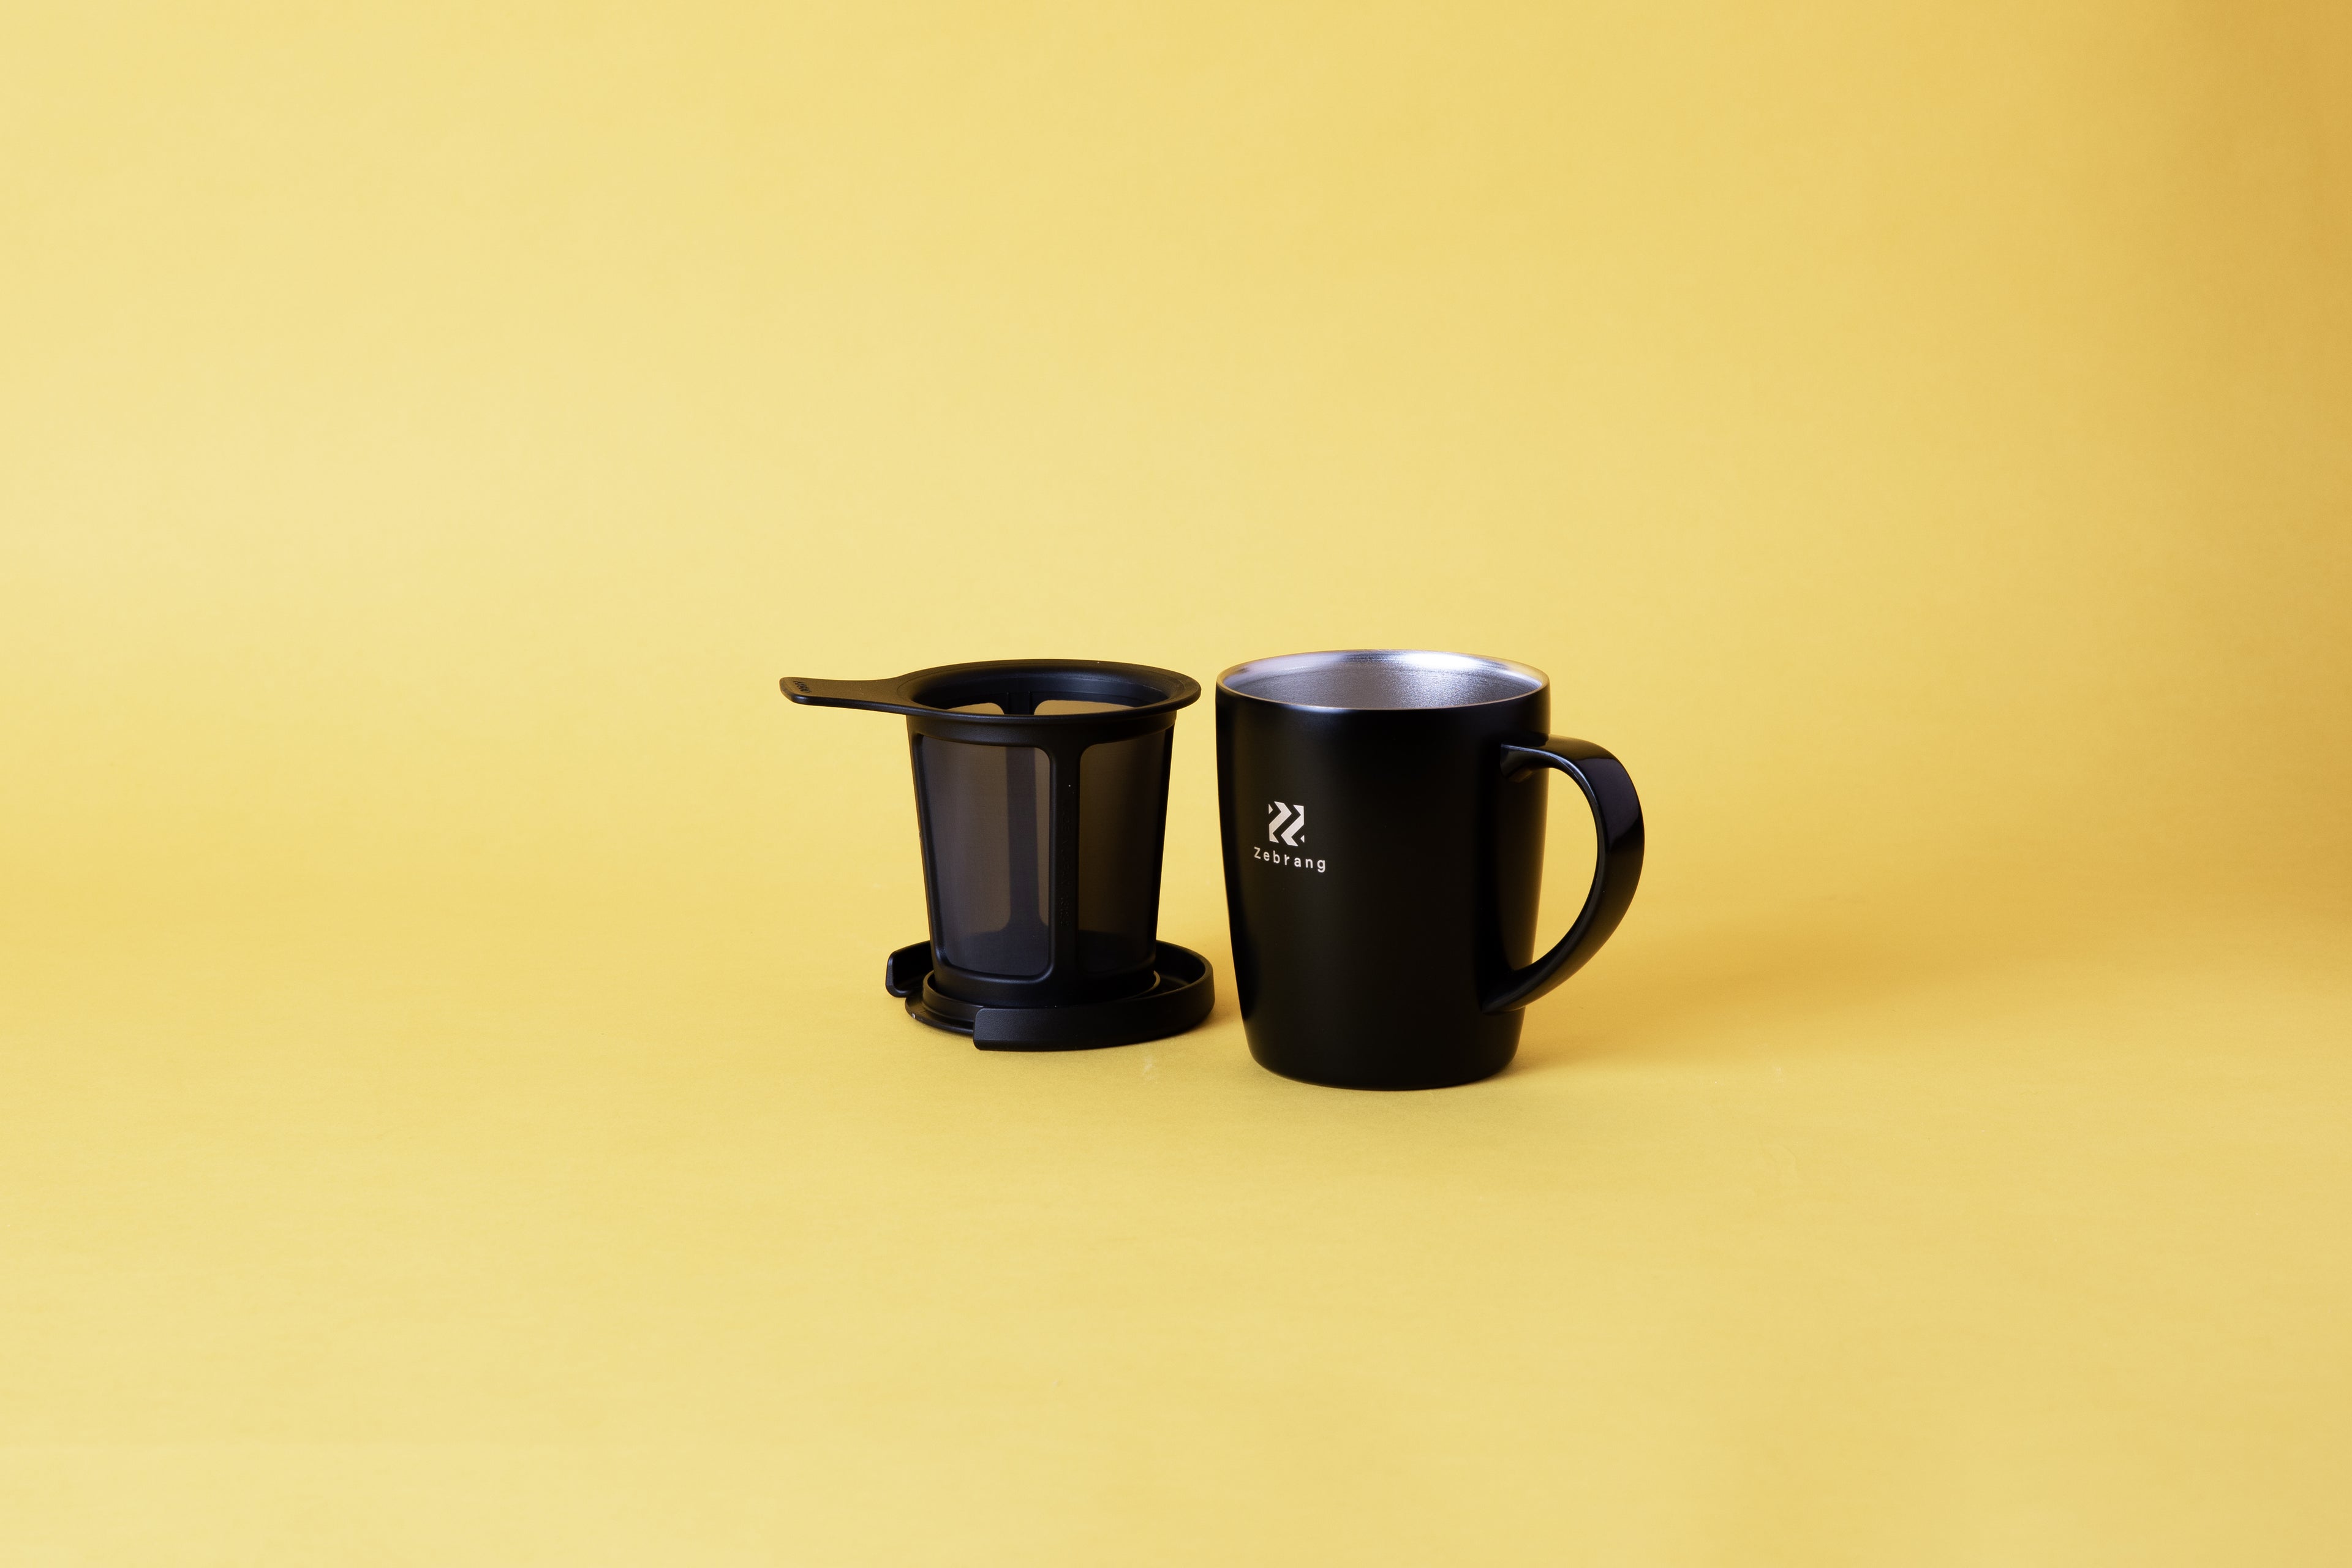 Black mug with handle, exposing inside of the mug which is stainless steel. Coffee filter basket that can be placed inside the mug. The lid of the mug is used as a coffee basket drip tray. set on yellow background